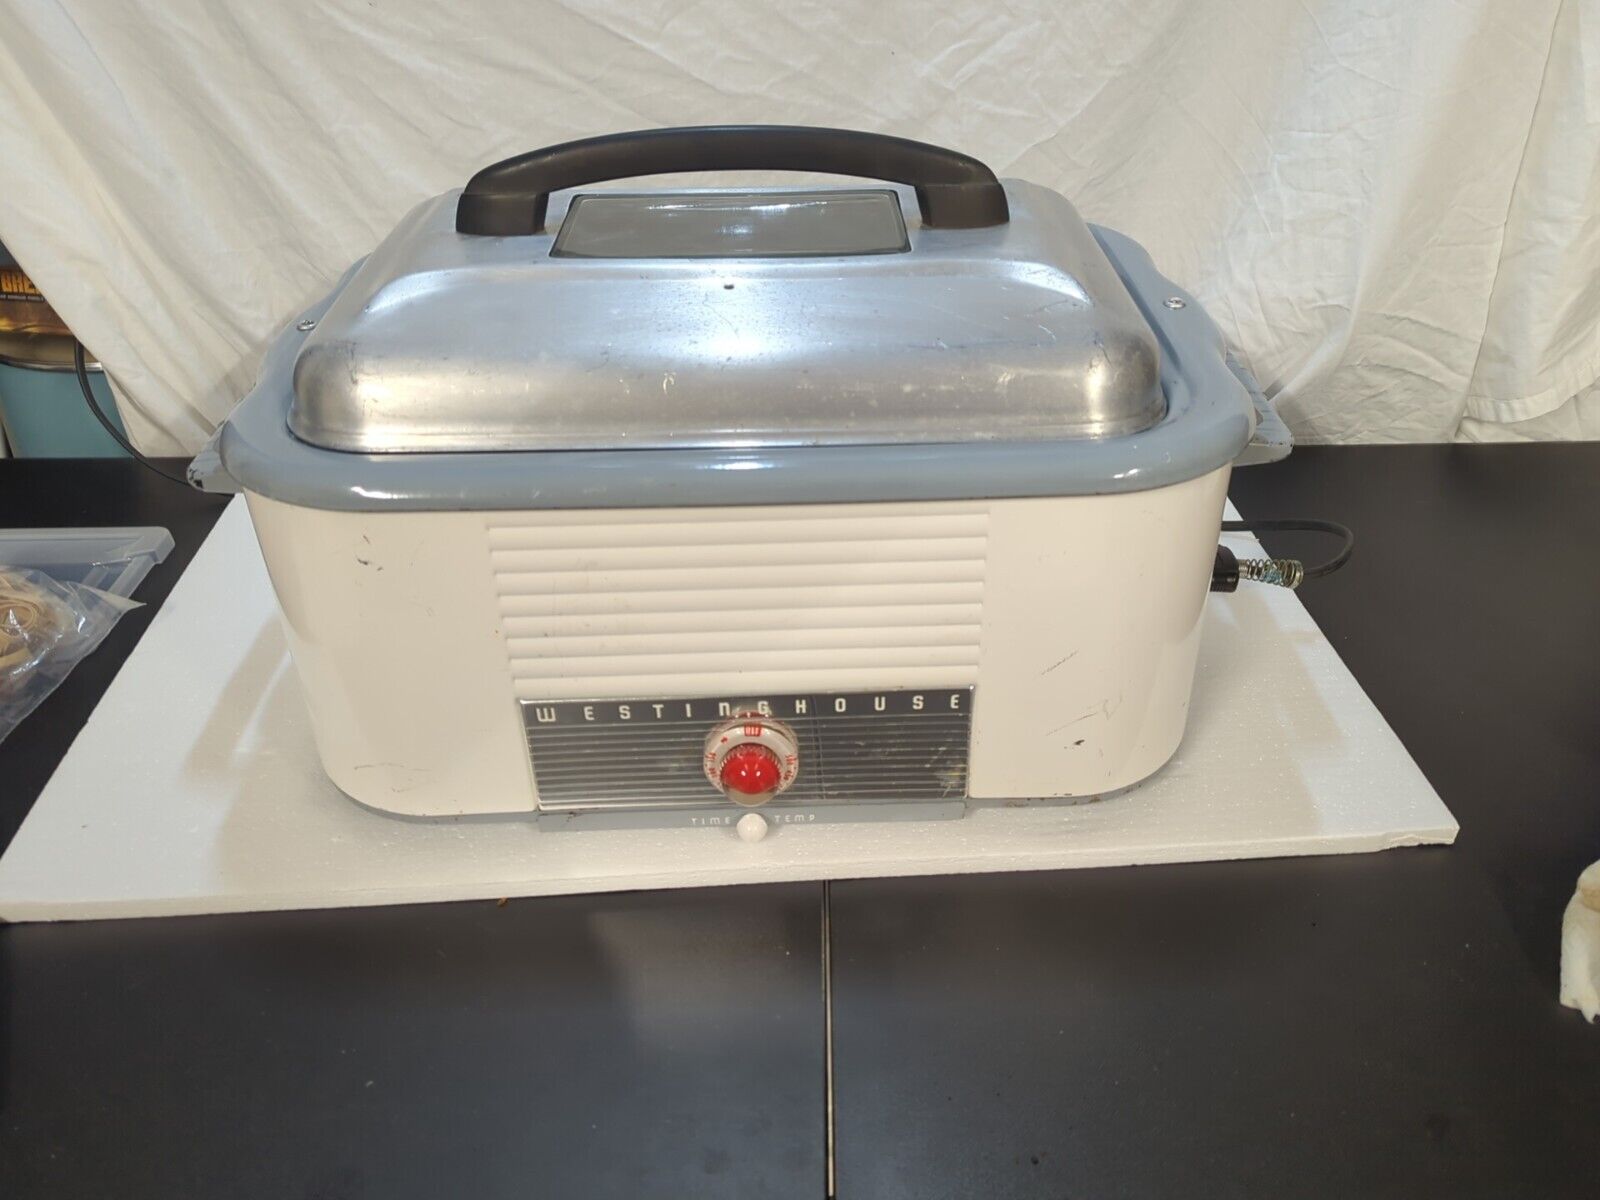 Vintage Mid Century Westinghouse Electric Roaster Oven (No Rack) Tested/Works